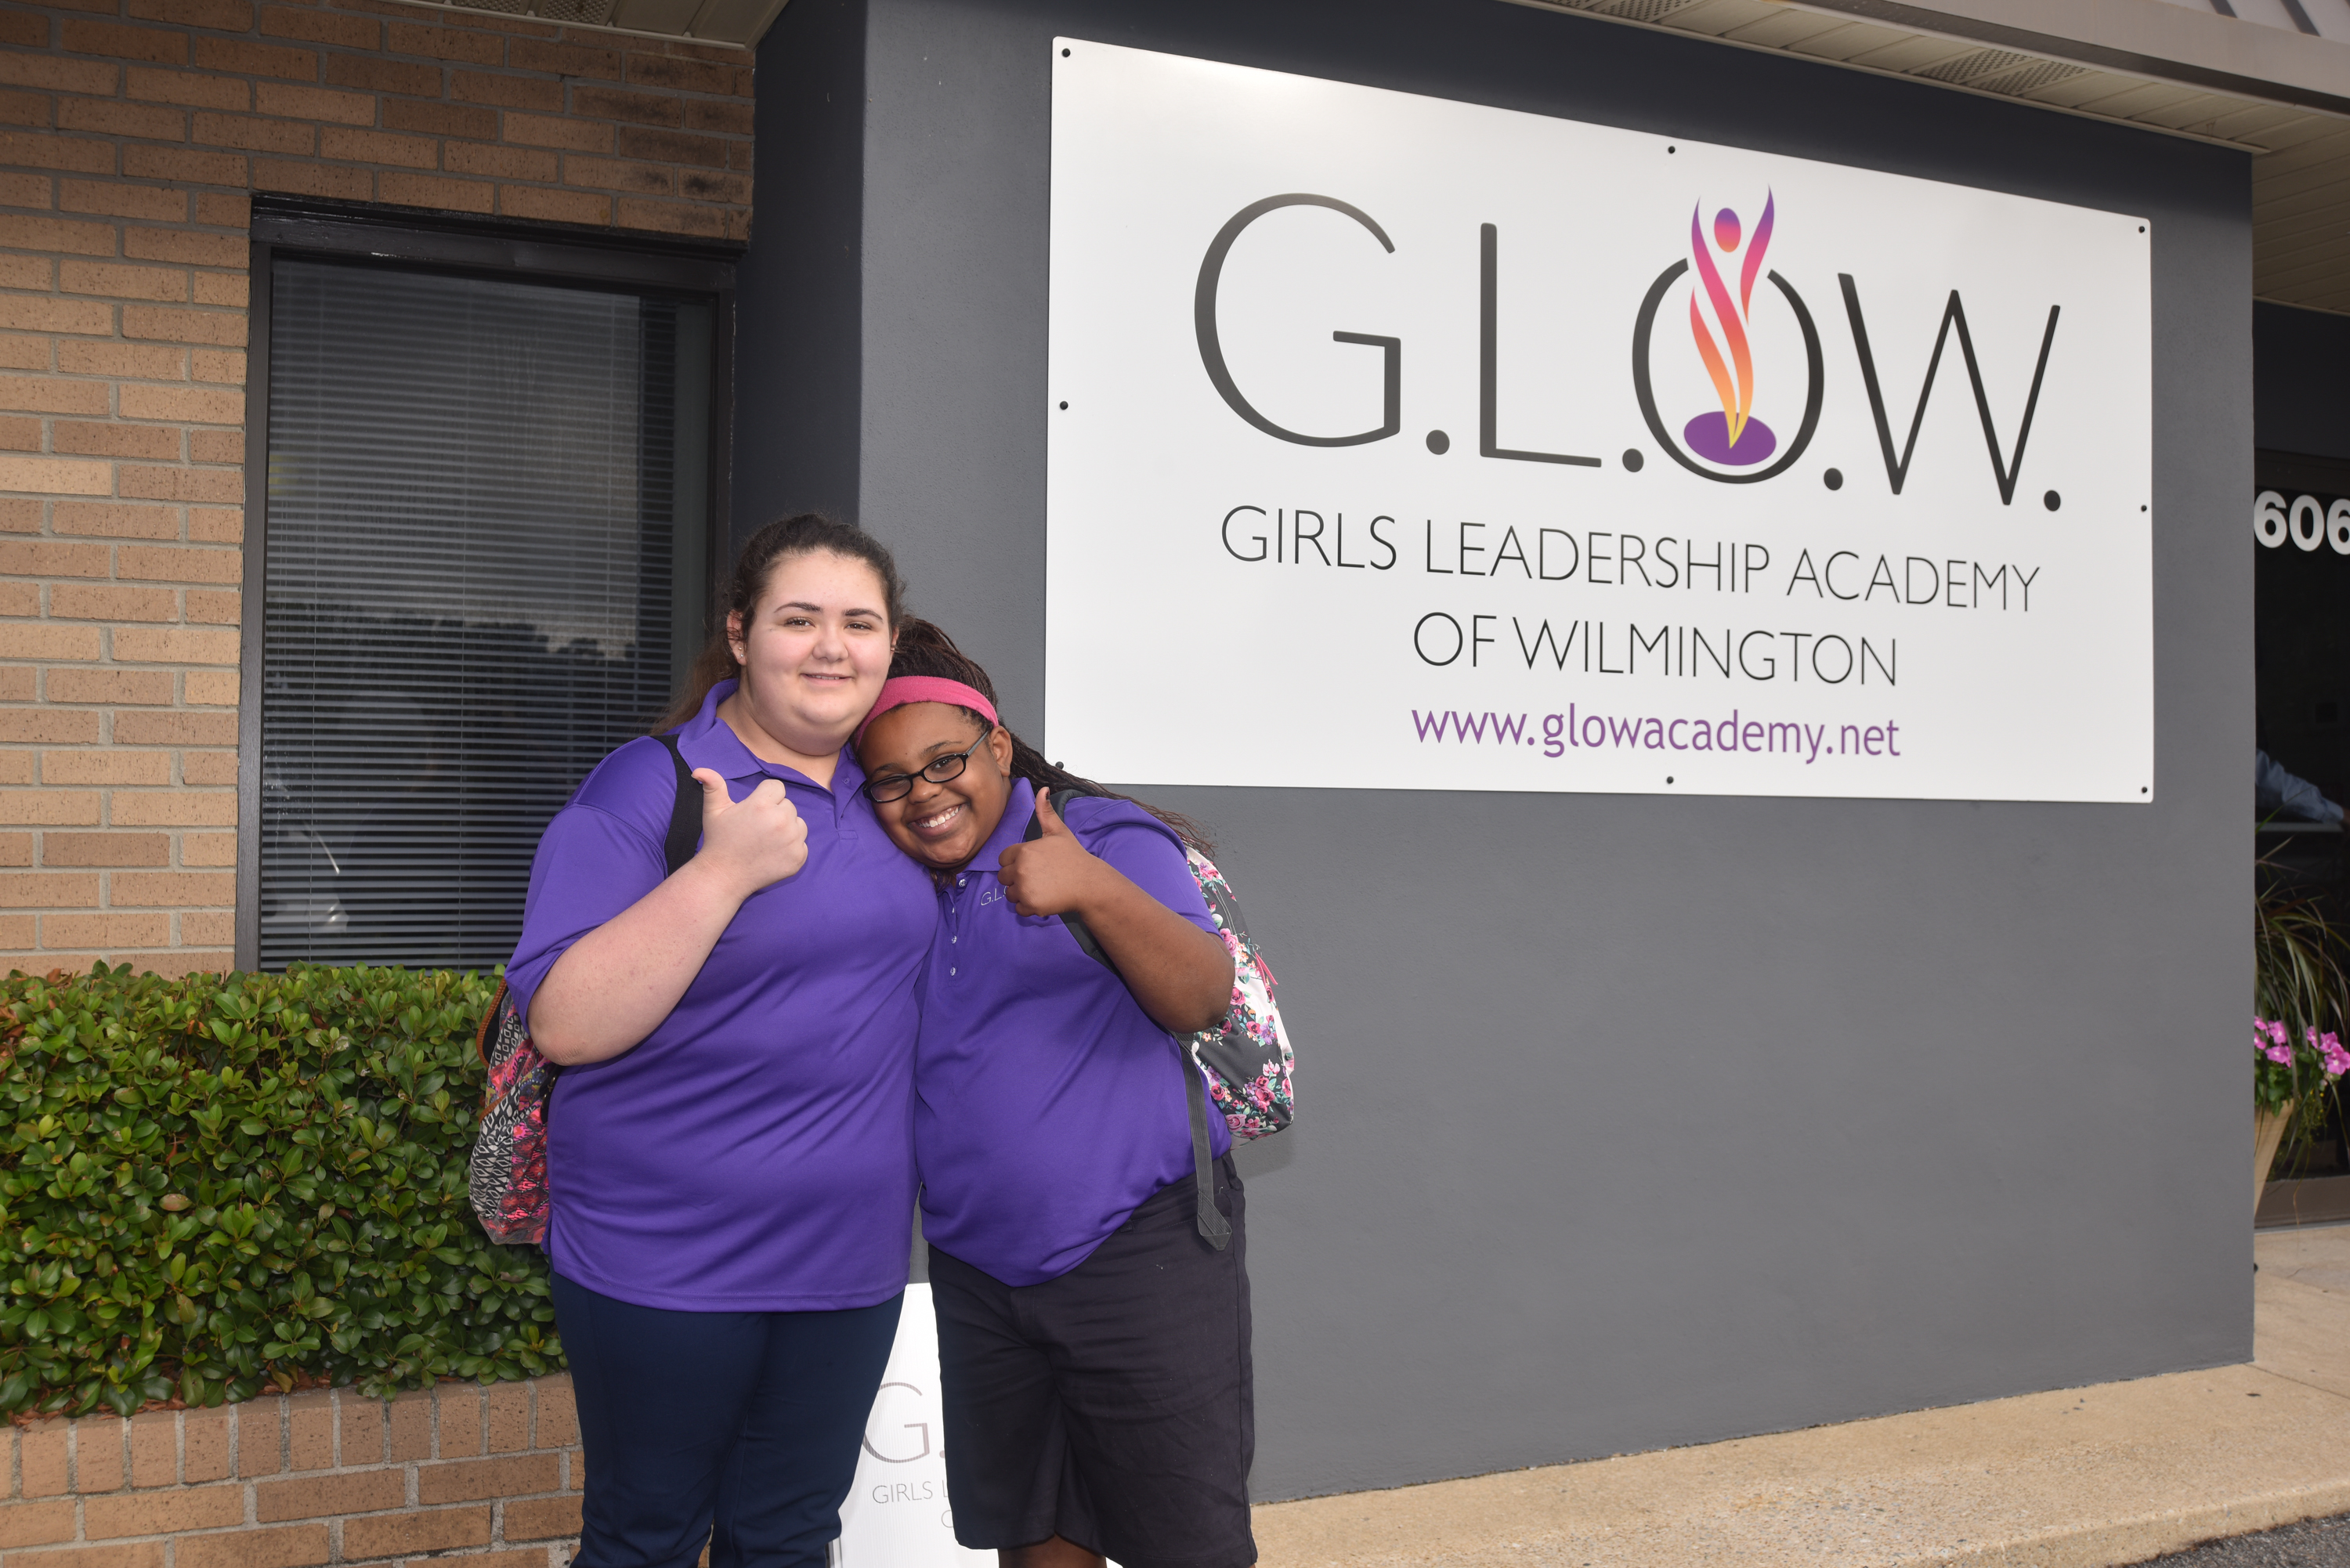 GLOW students proudly pose in front of the Academy logo.